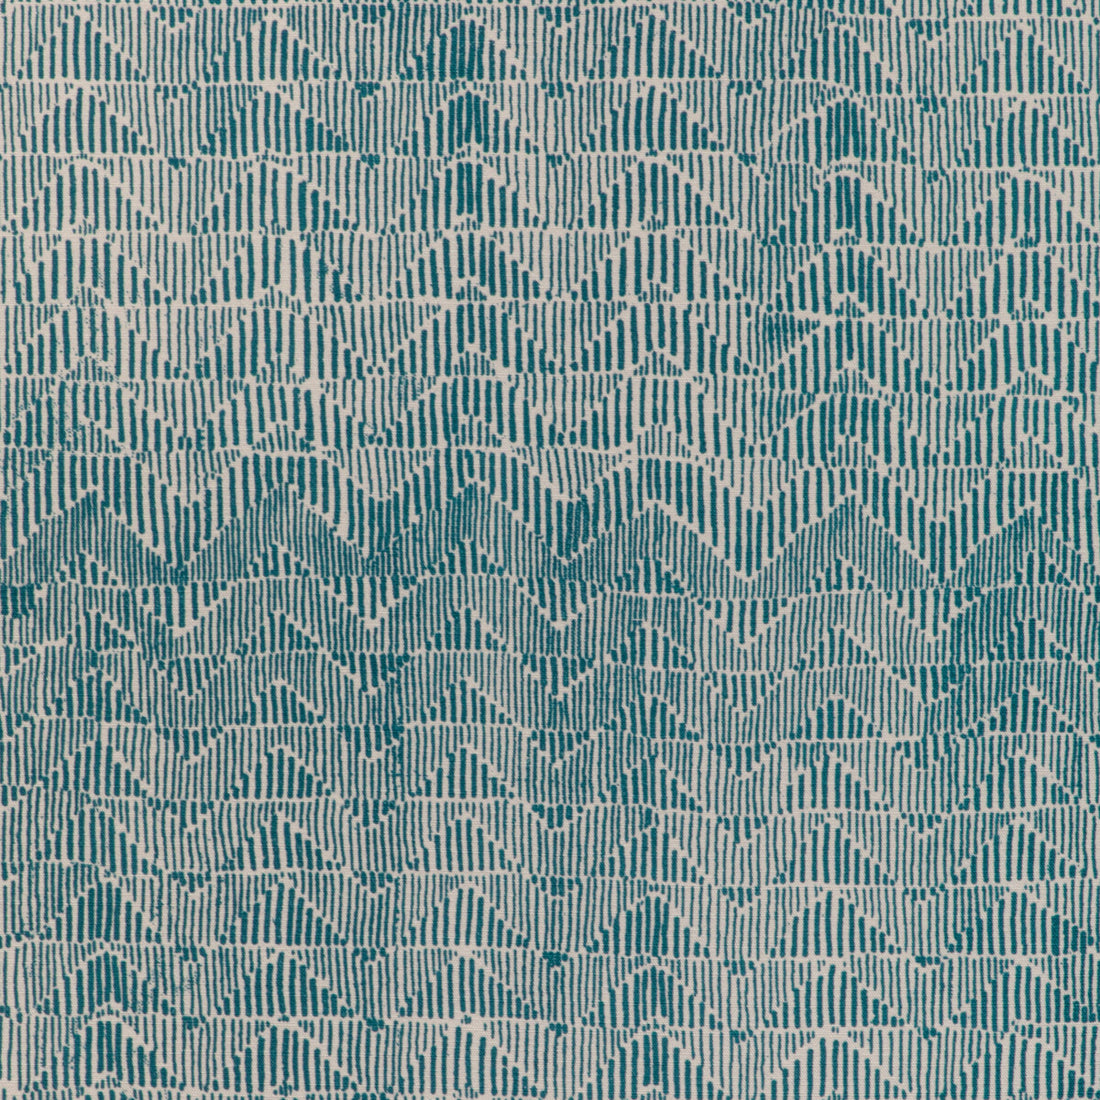 Les Cigales Print fabric in teal color - pattern 8024112.313.0 - by Brunschwig &amp; Fils in the Les Ensembliers L&